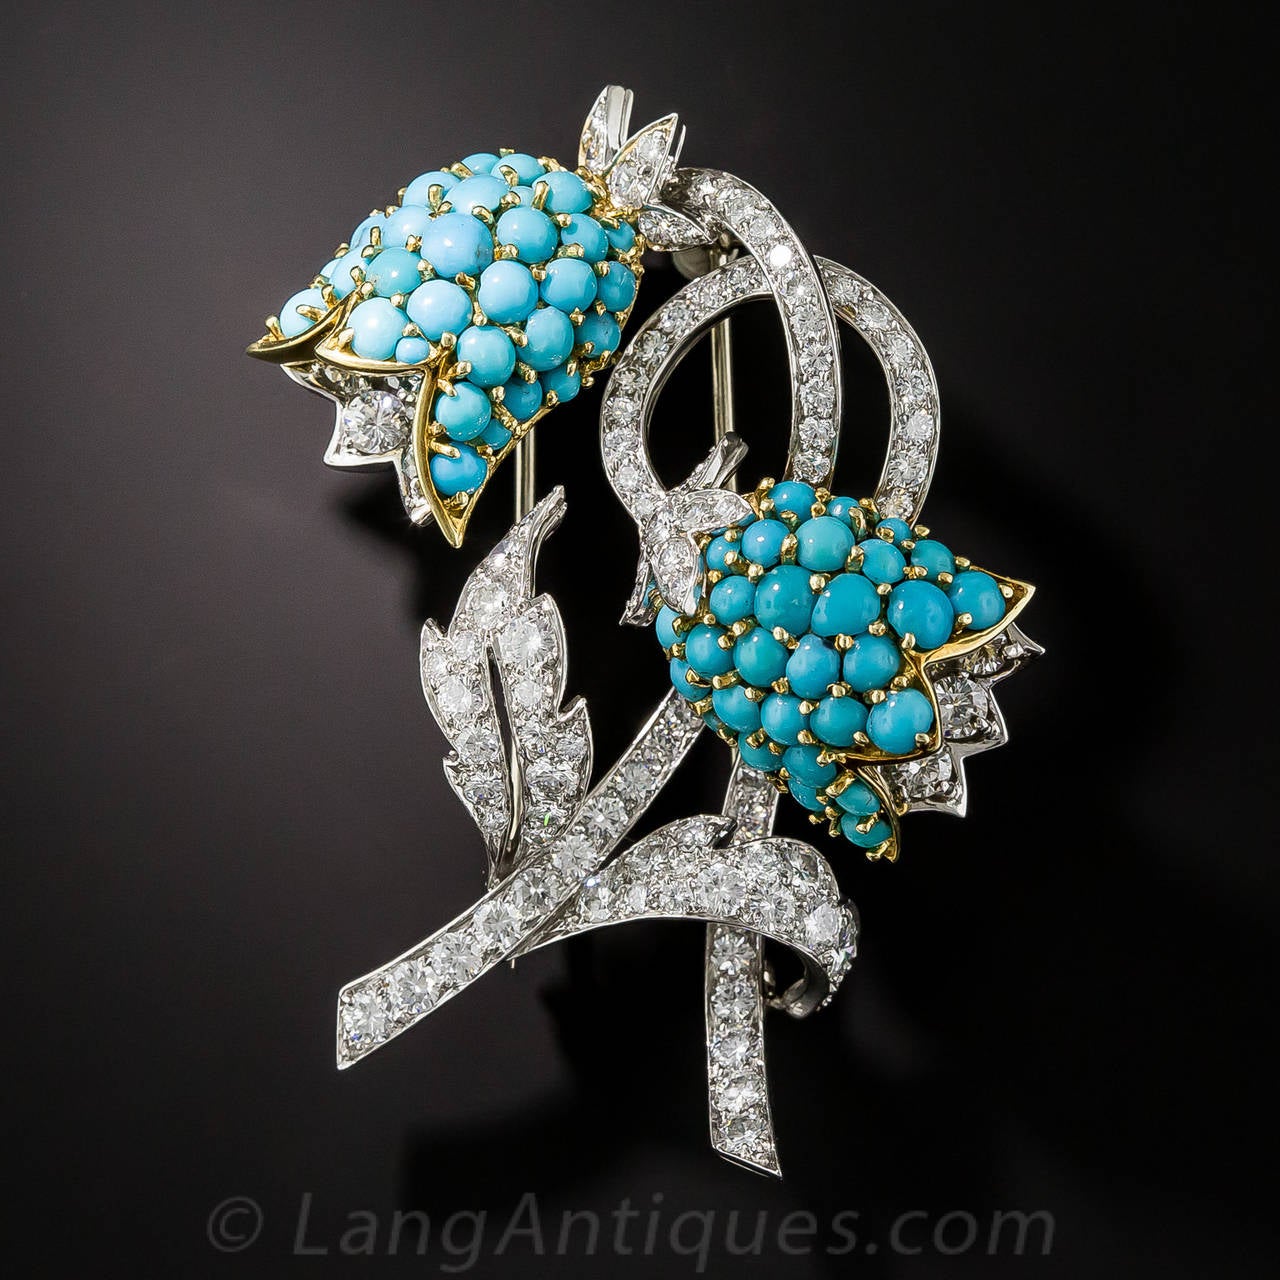 Ring in springtime all year round with this double charming bluebell brooch, artfully and masterfully hand crafted in platinum with a touch of 18K yellow gold. The multidimensional flowers are studded in bright turquoise and the sinuous stems and